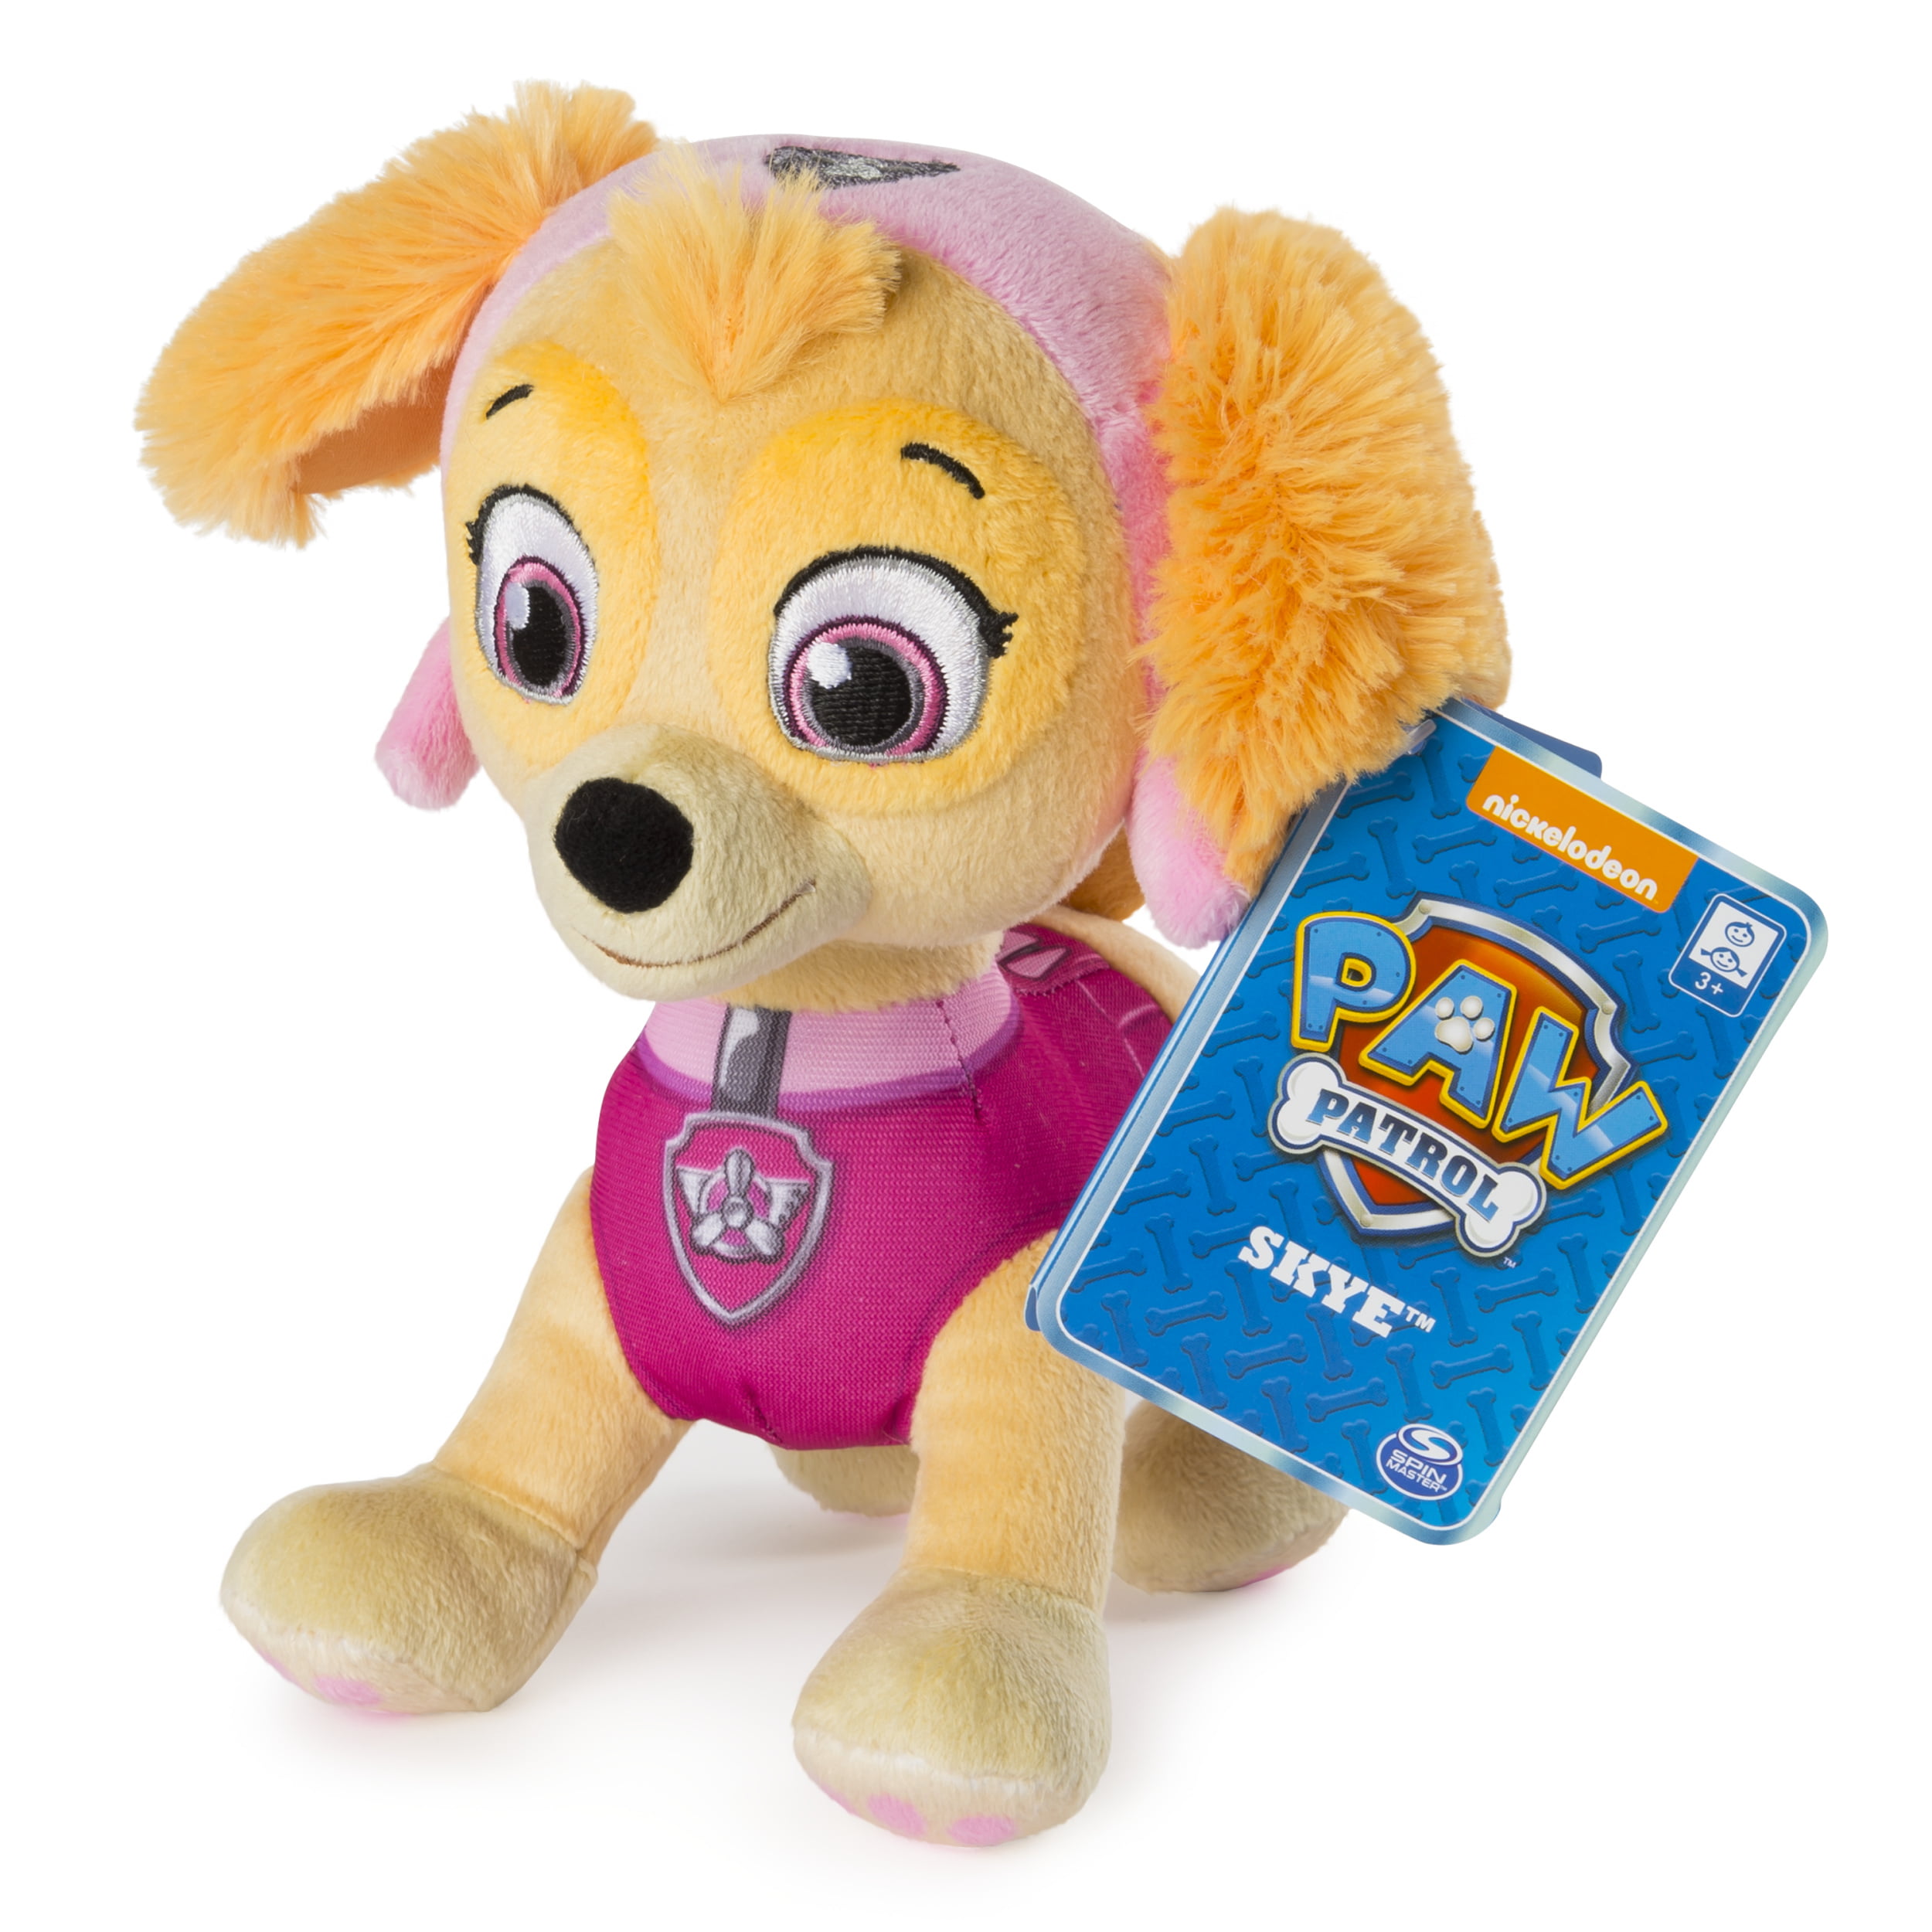 Motley Foreman middag PAW Patrol – 8” Skye Plush Toy, Standing Plush with Stitched Detailing, for  Ages 3 and up - Walmart.com